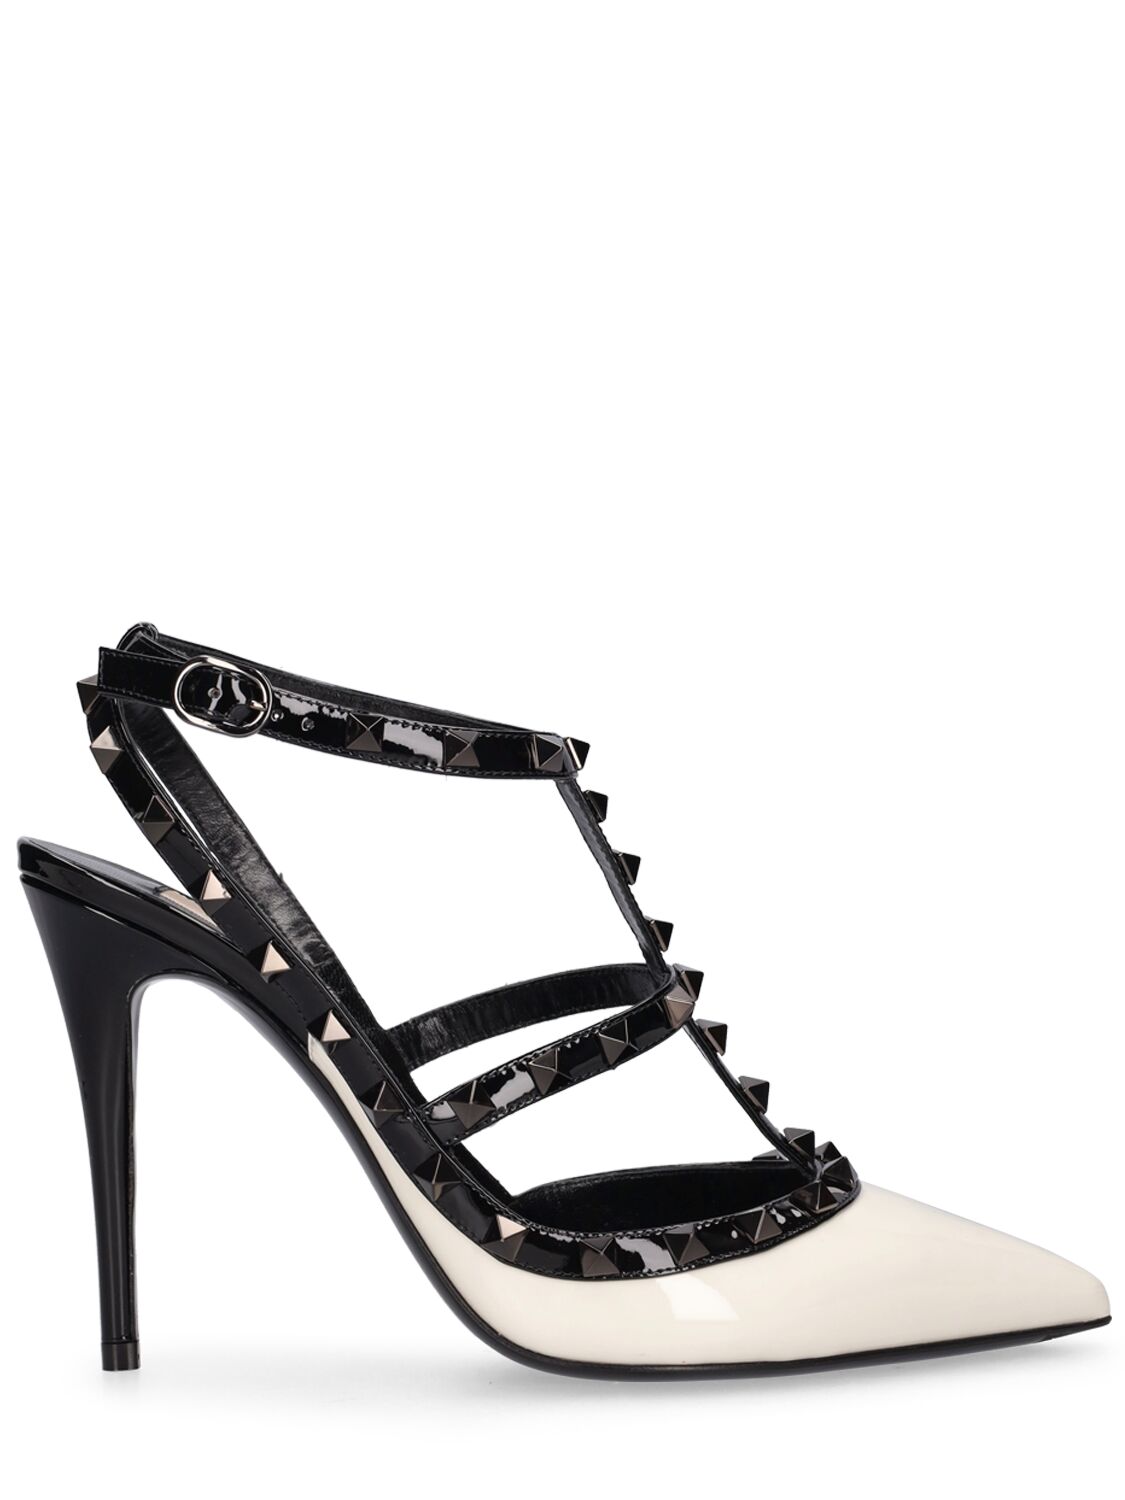 Shop Valentino 100mm Rockstud Patent Leather Pumps In Ivory,black